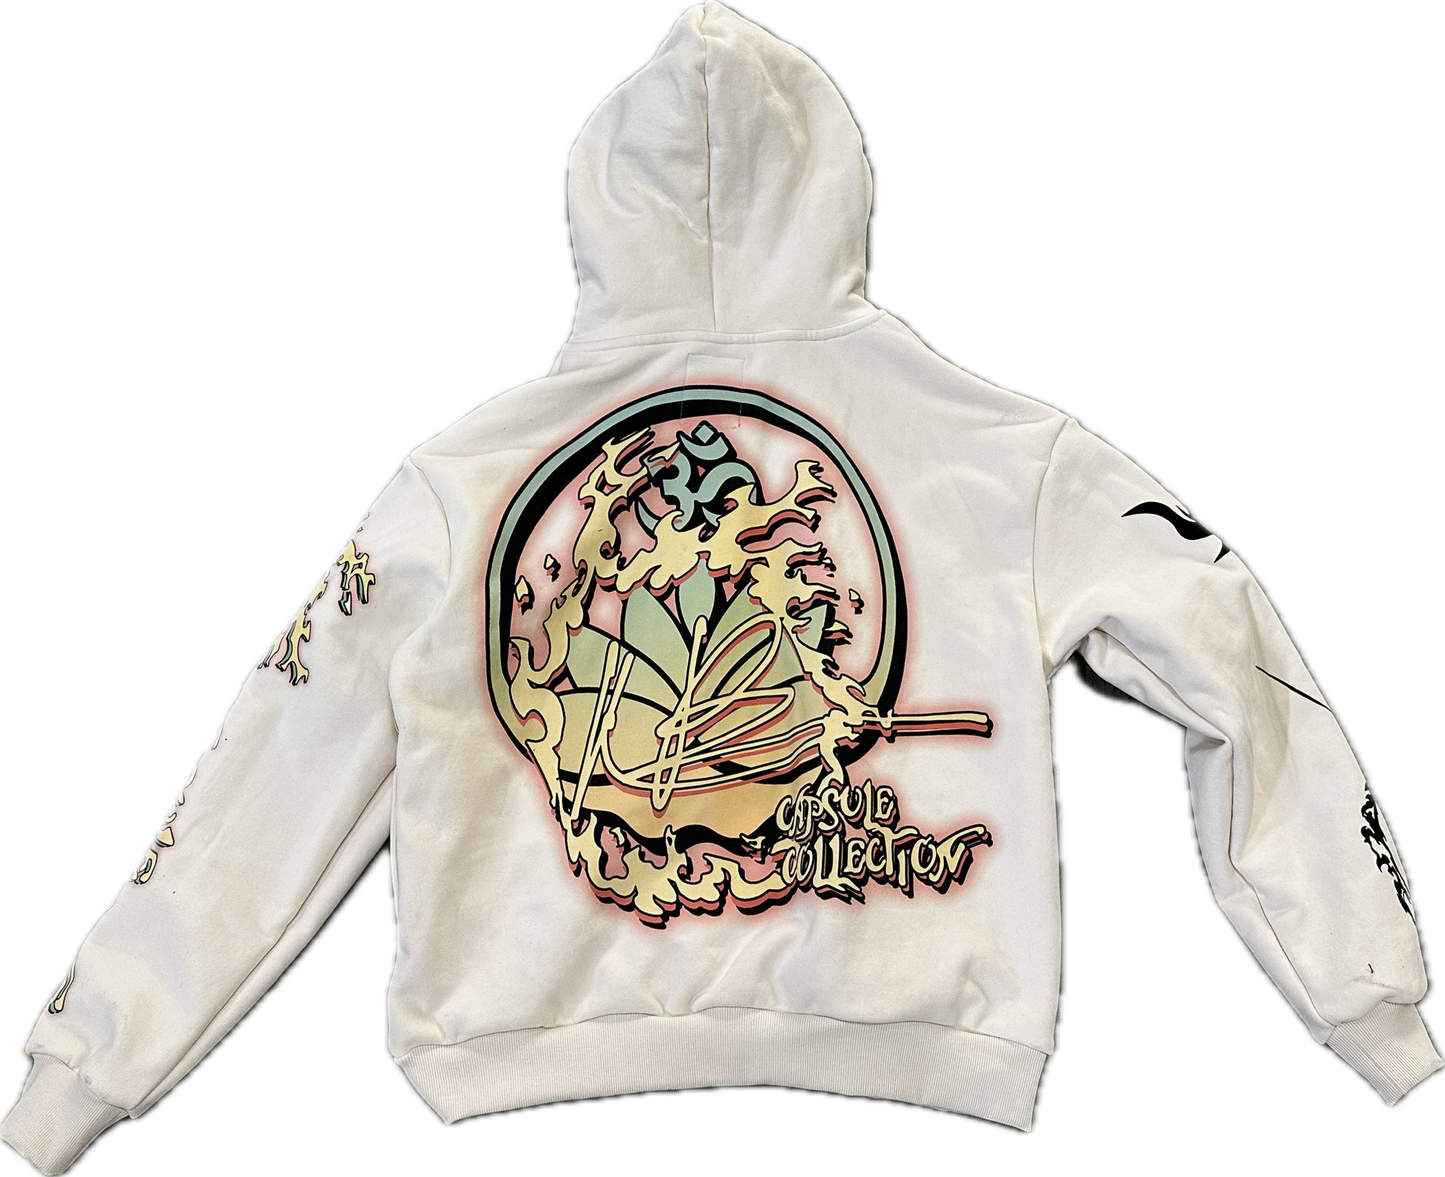 The “India Goddess Collection” Hoodie 🇮🇳